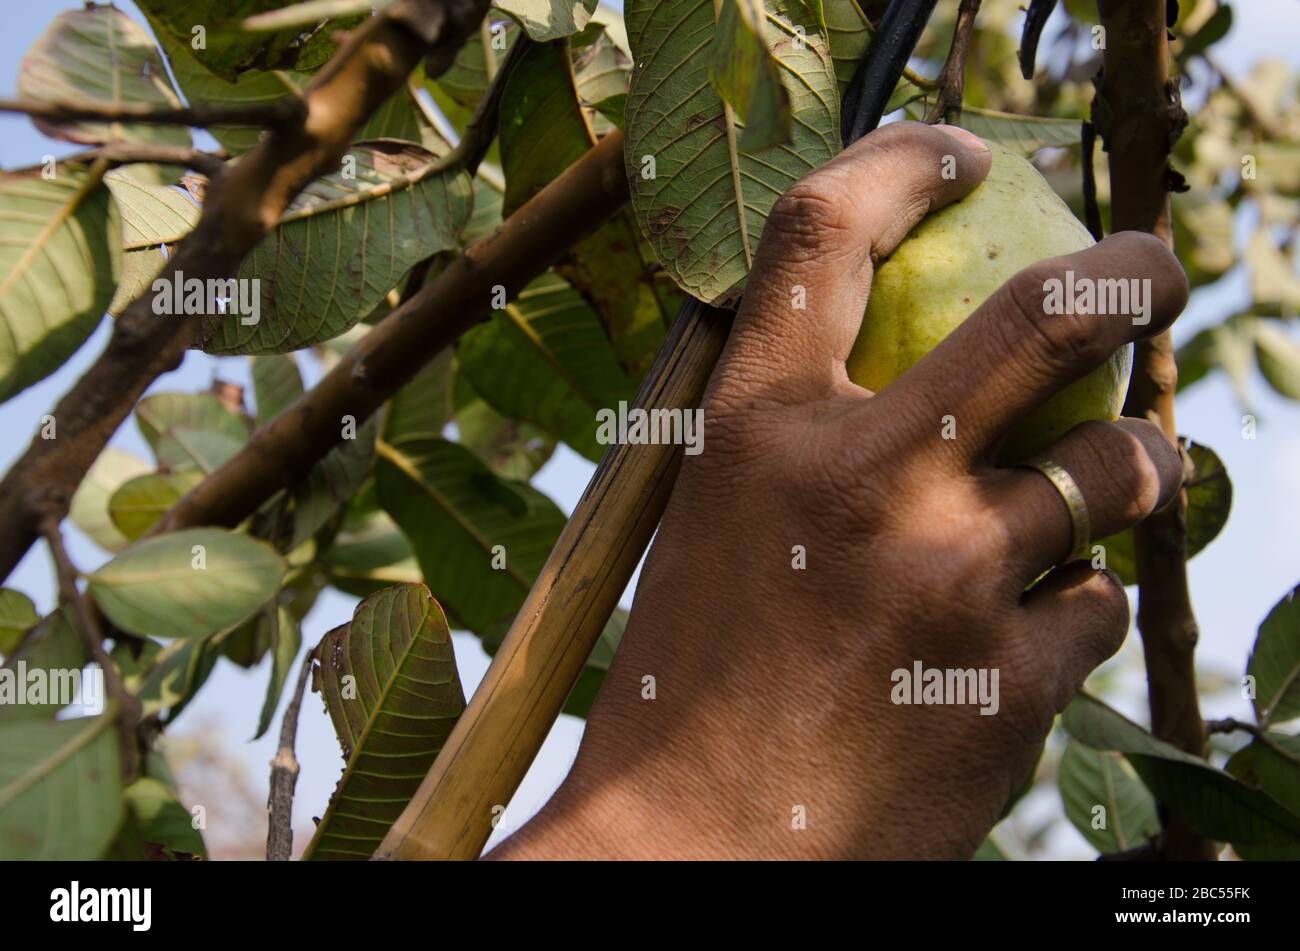 Muhammad Subhan picks guava from a tree to sorted and packed afterwards in Sharaqpur district of Punjab province in Pakistan. Stock Photo